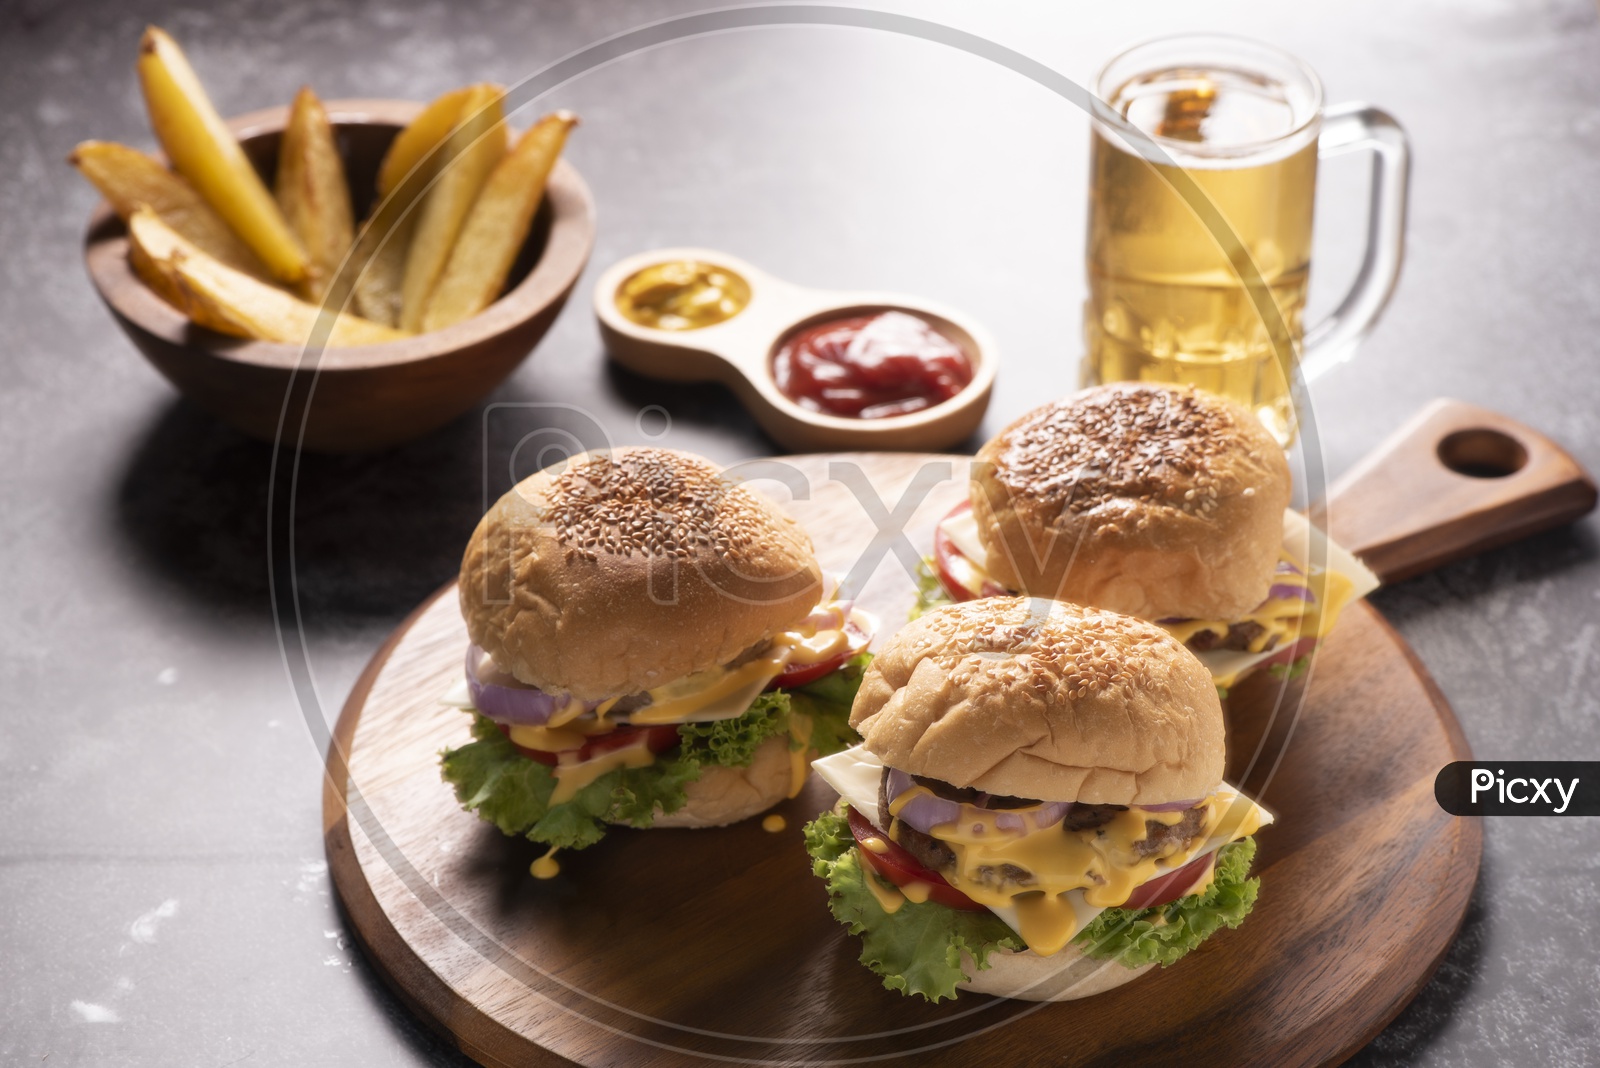 Tasty grilled home made burgers with beef, tomato, cheese, cucumber and lettuce Served With Beer and Potato Wedges